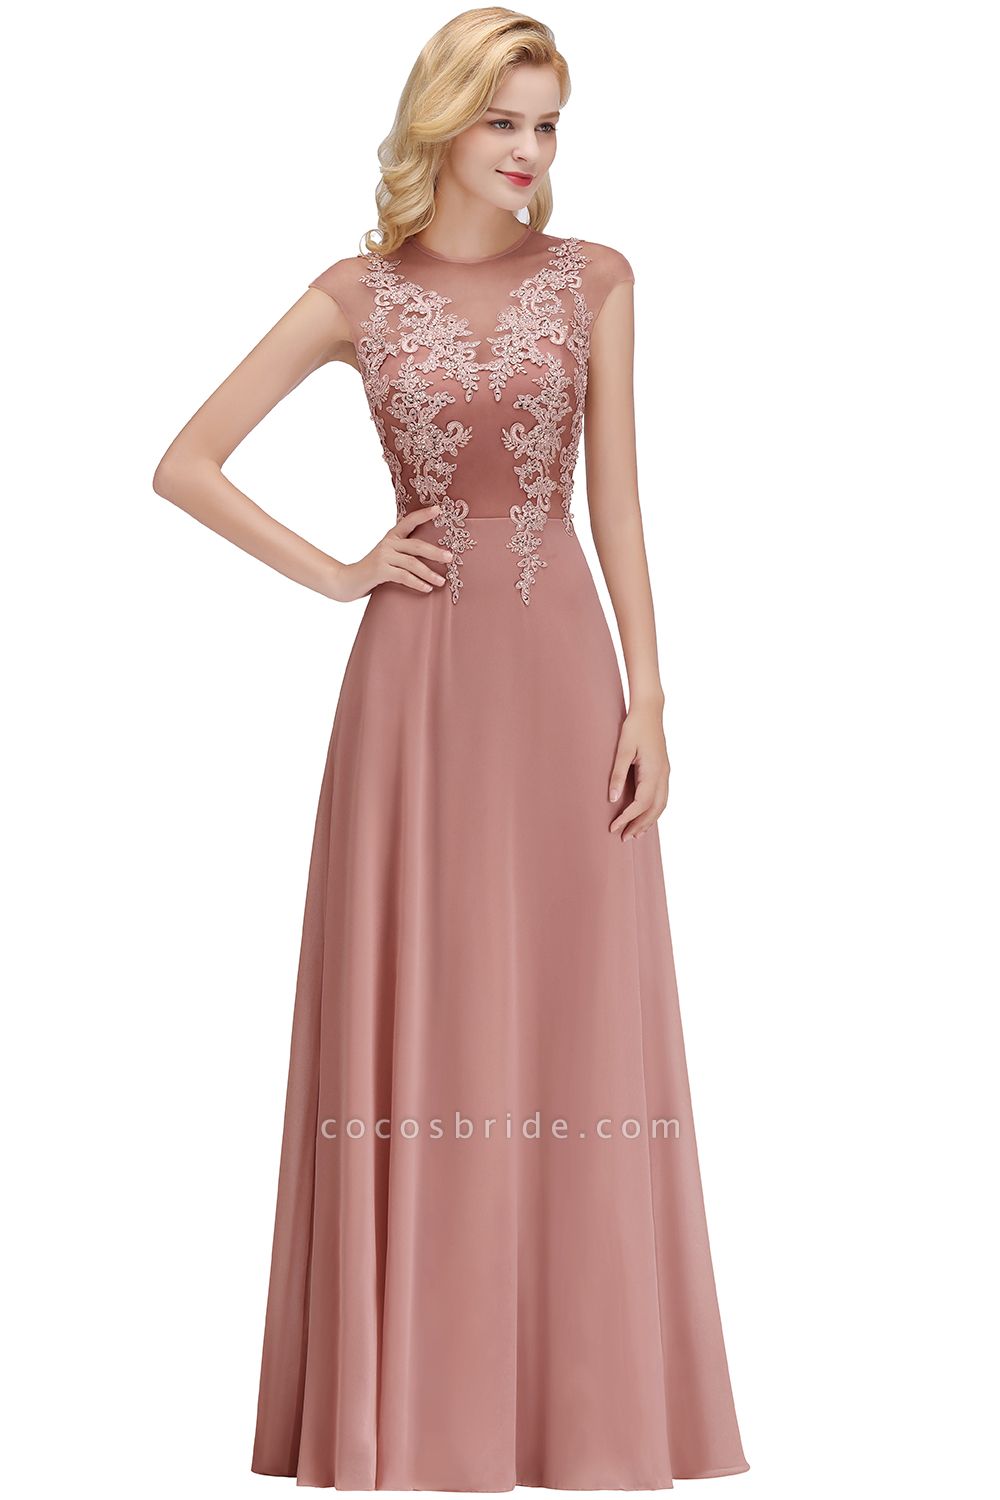 Lace Appliques Beads Cap Sleeve A-line Evening Prom Dress